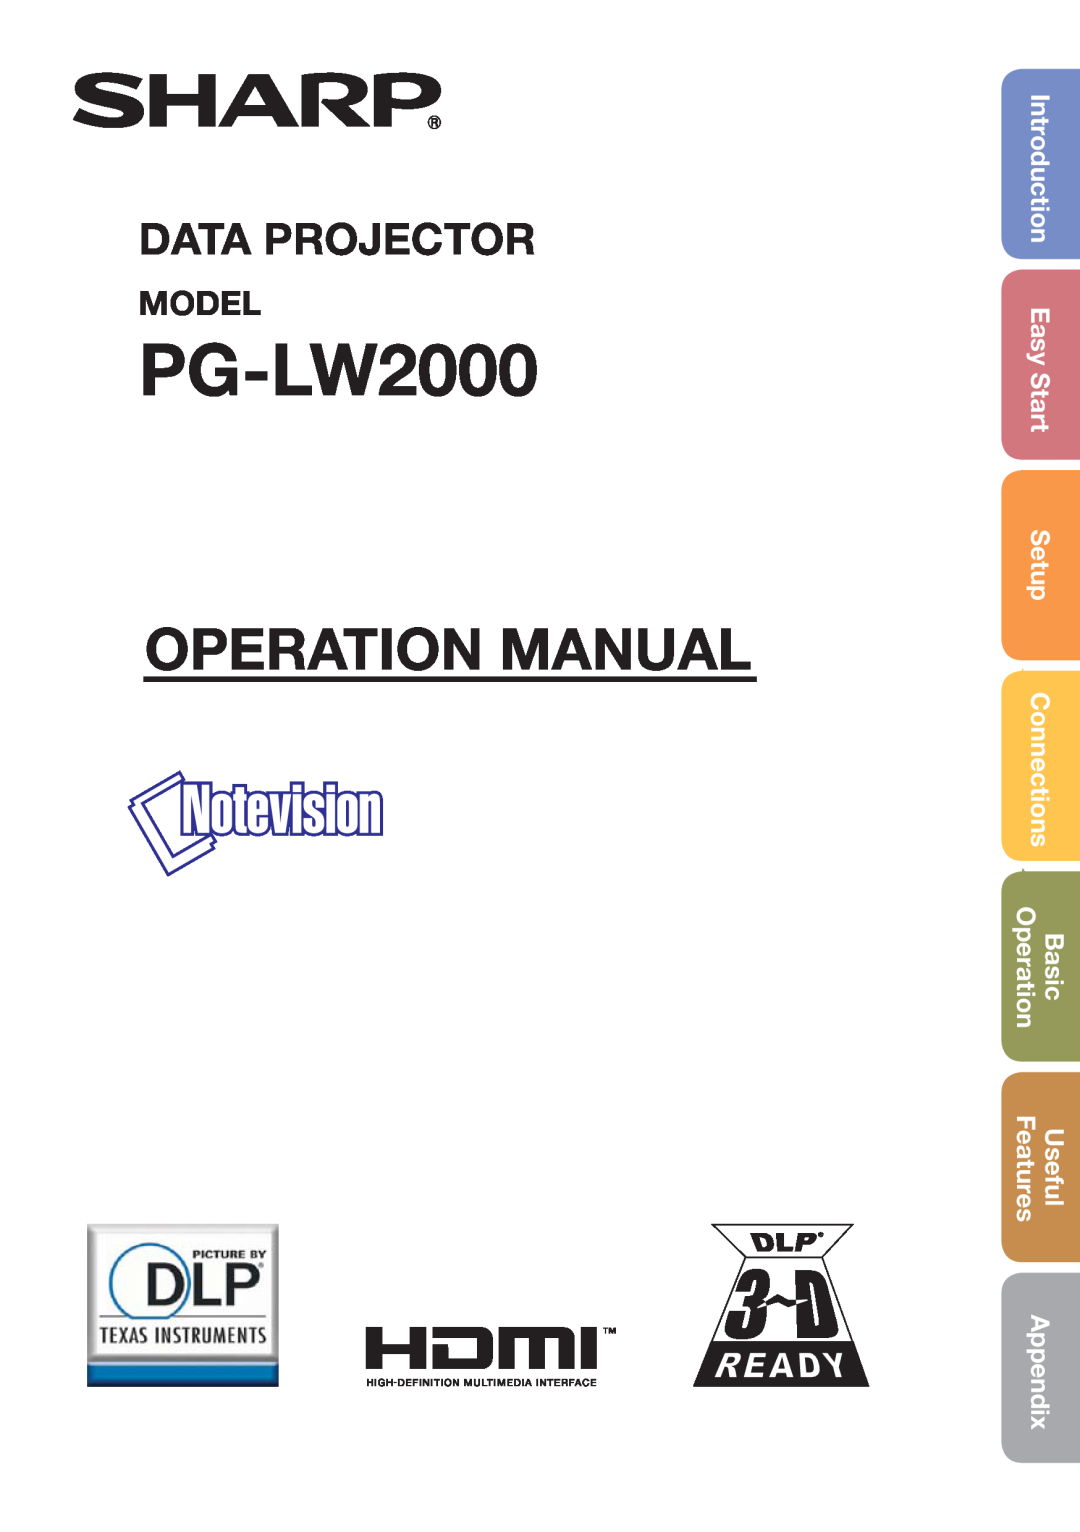 Sharp PGLW2000 appendix Introduction, Easy Start, Connections, Basic, Useful, Appendix, Setup, Operation, Features, Model 